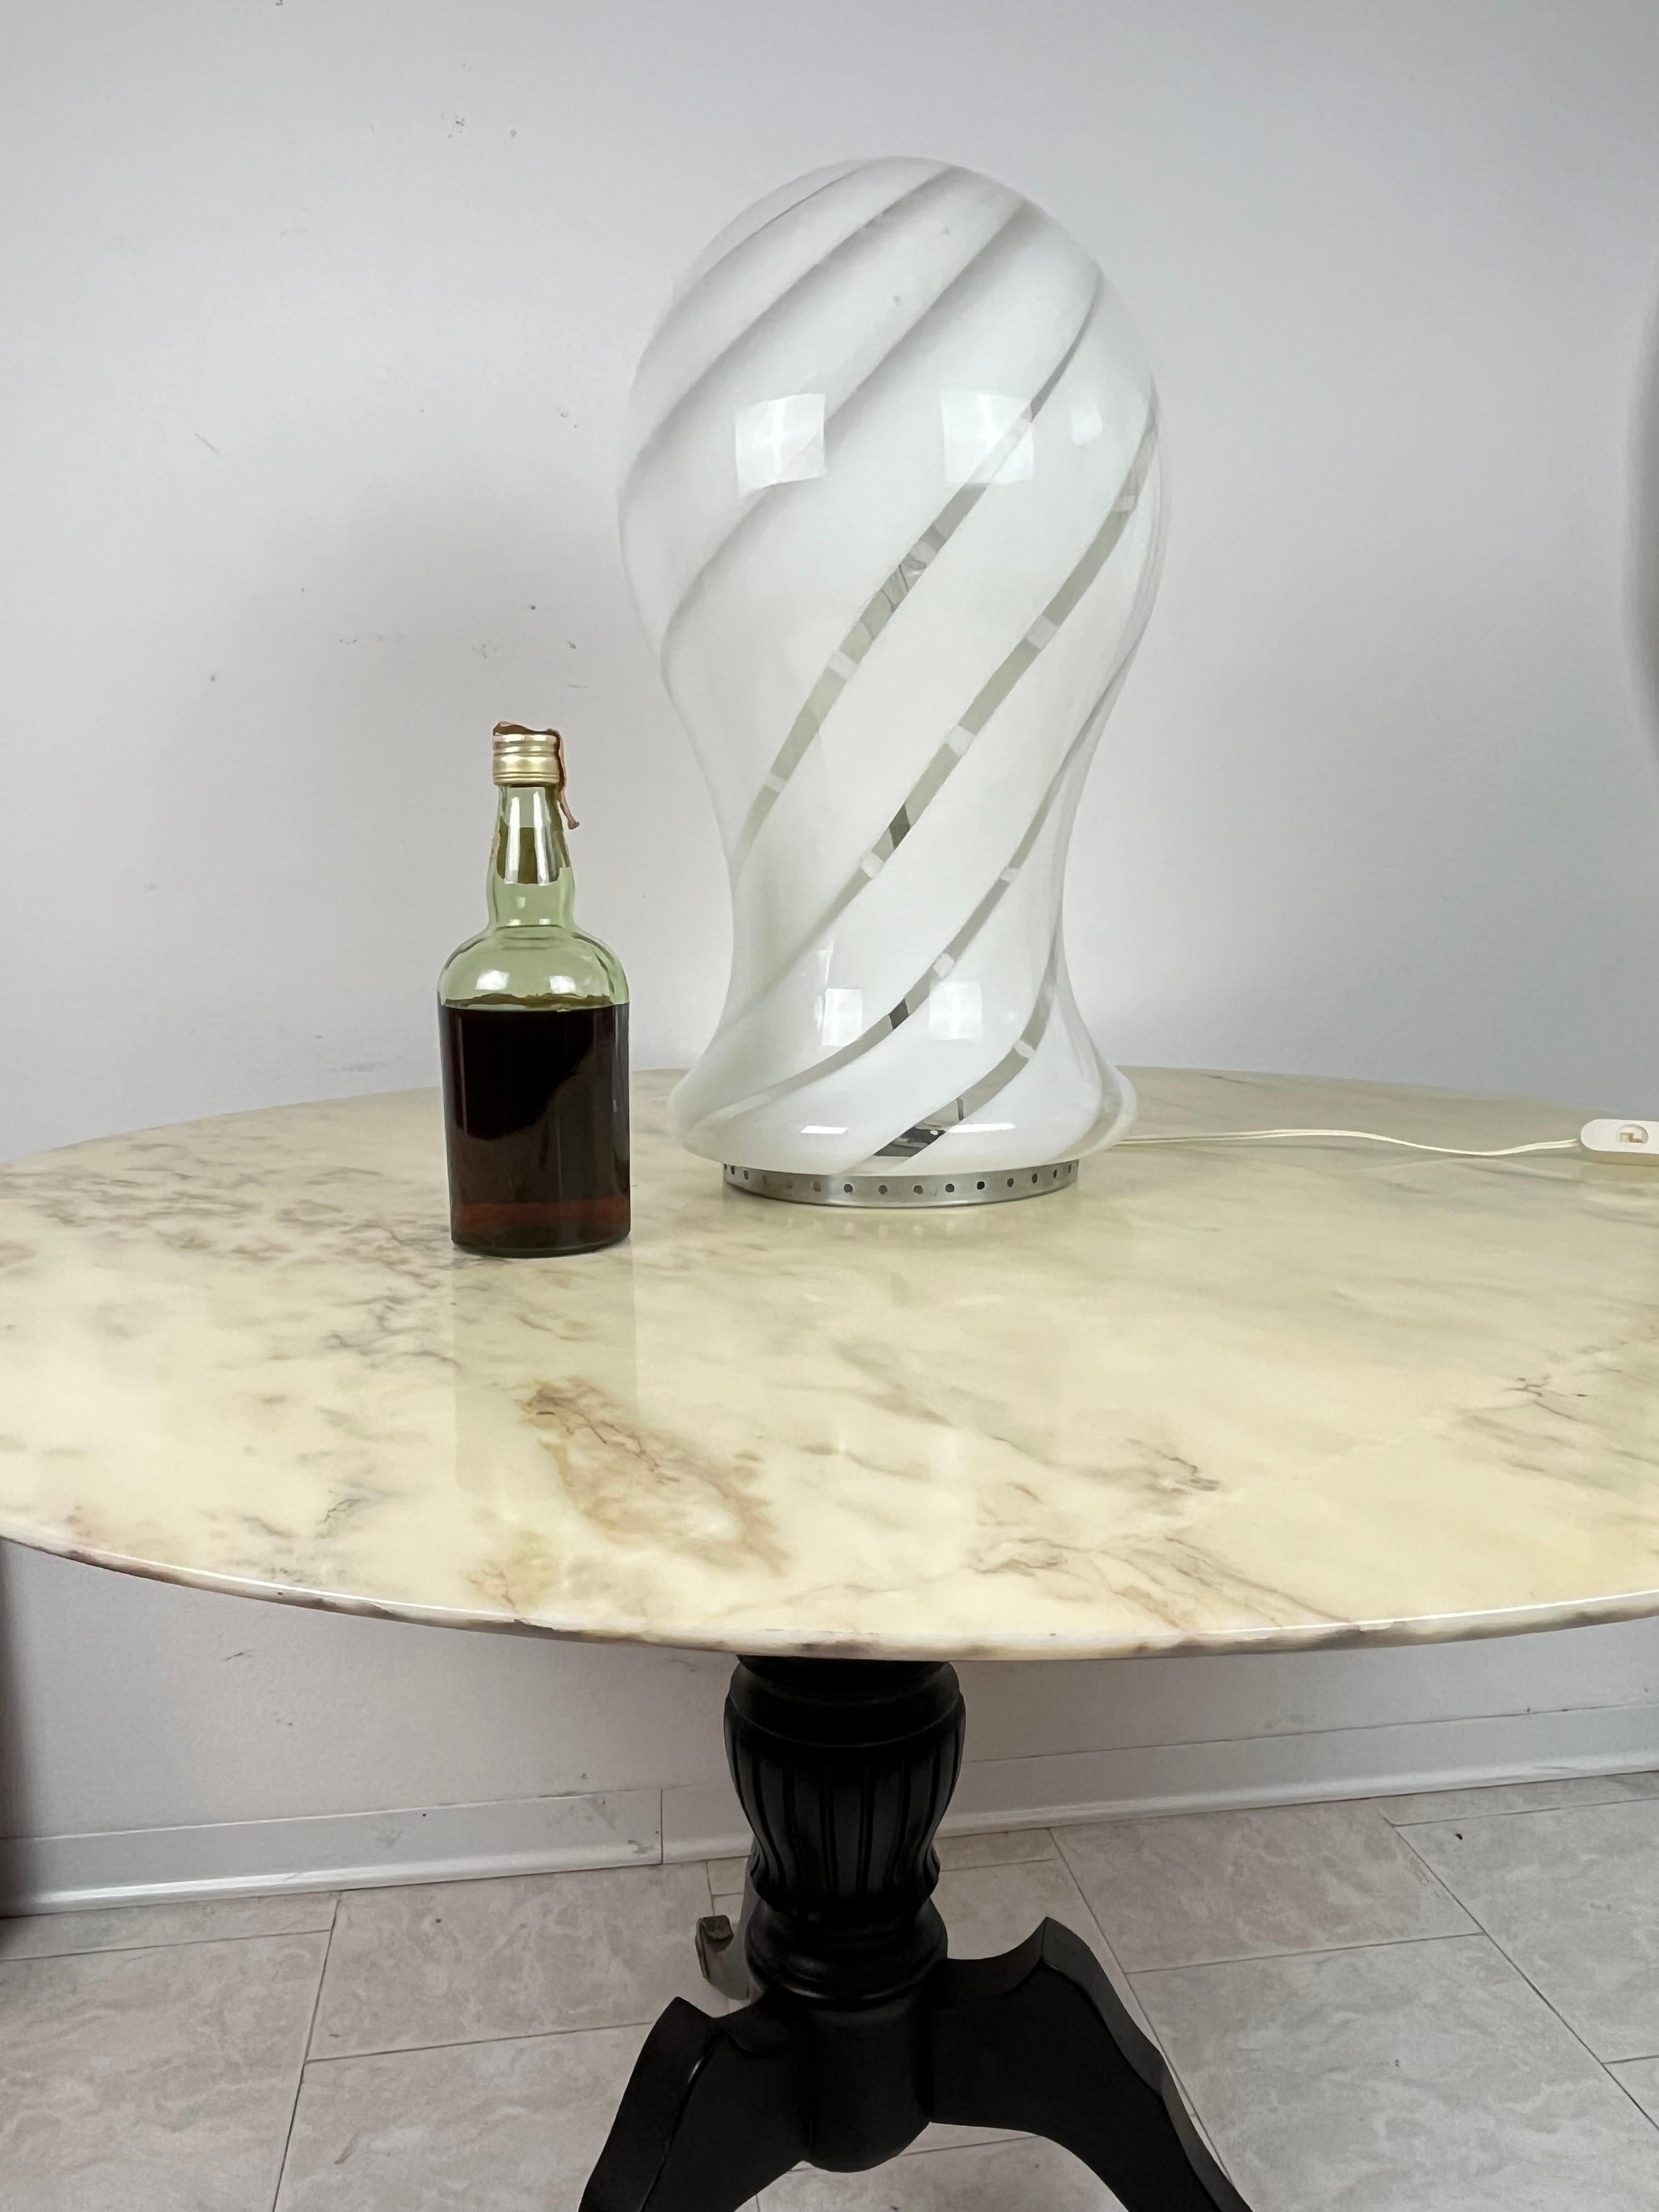 Large Murano glass table lamp, made in Italy, 1970s
Intact and functional, 55 cm high.
Artisanal workmanship, purchased in Venice.

We guarantee adequate packaging and will ship via DHL, insuring the contents against any breakage or loss of the